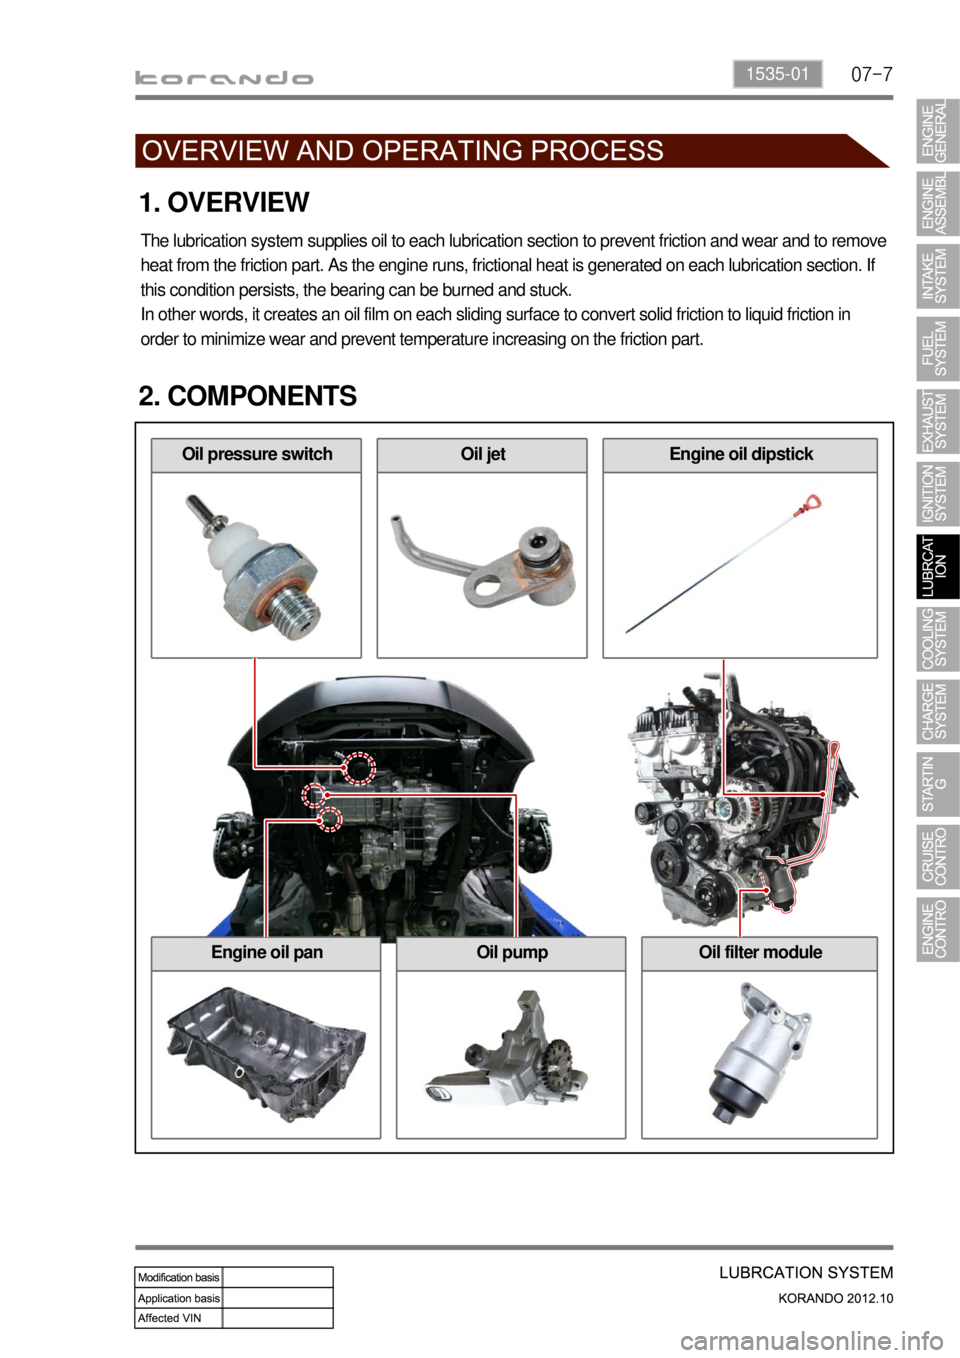 SSANGYONG KORANDO 2012  Service Manual 07-71535-01
Oil pressure switch
1. OVERVIEW
The lubrication system supplies oil to each lubrication section to prevent friction and wear and to remove 
heat from the friction part. As the engine runs,